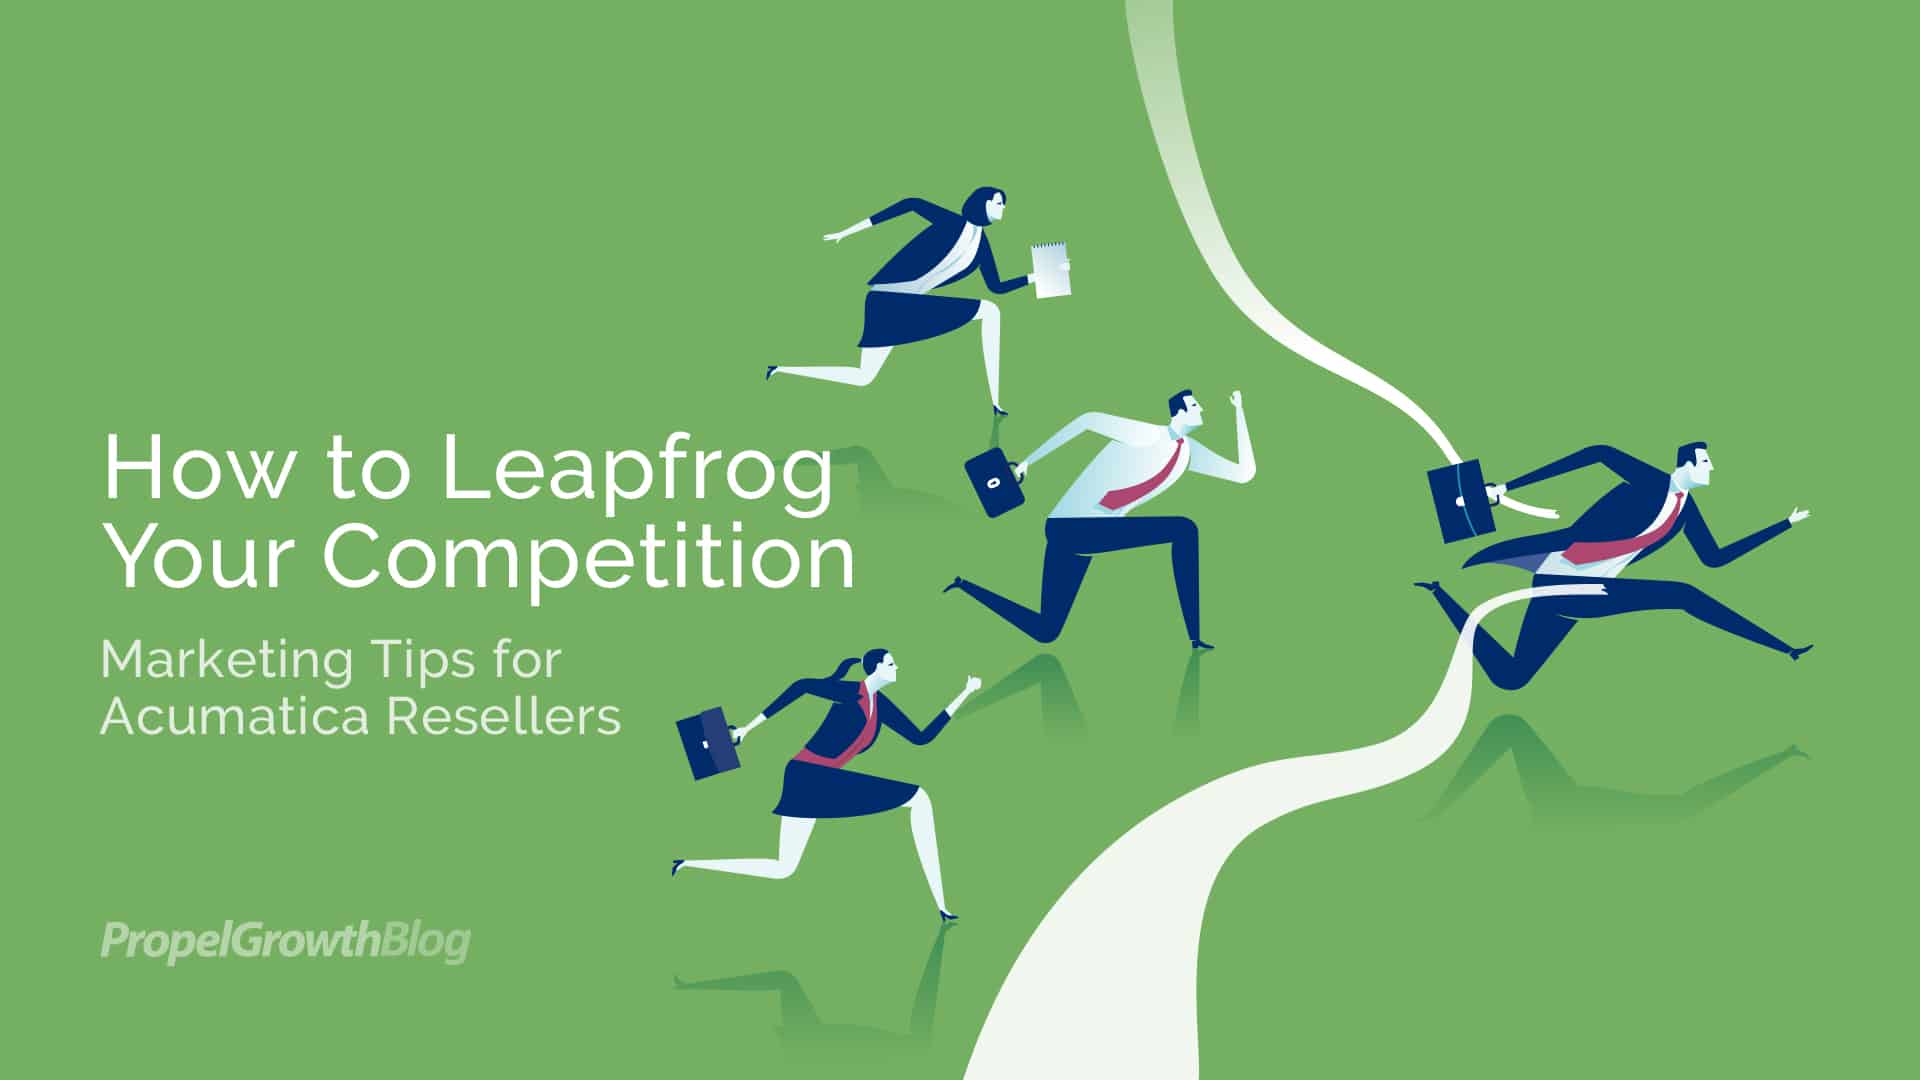 How to Leapfrog Your Competition - Marketing Tips for Acumatica Resellers